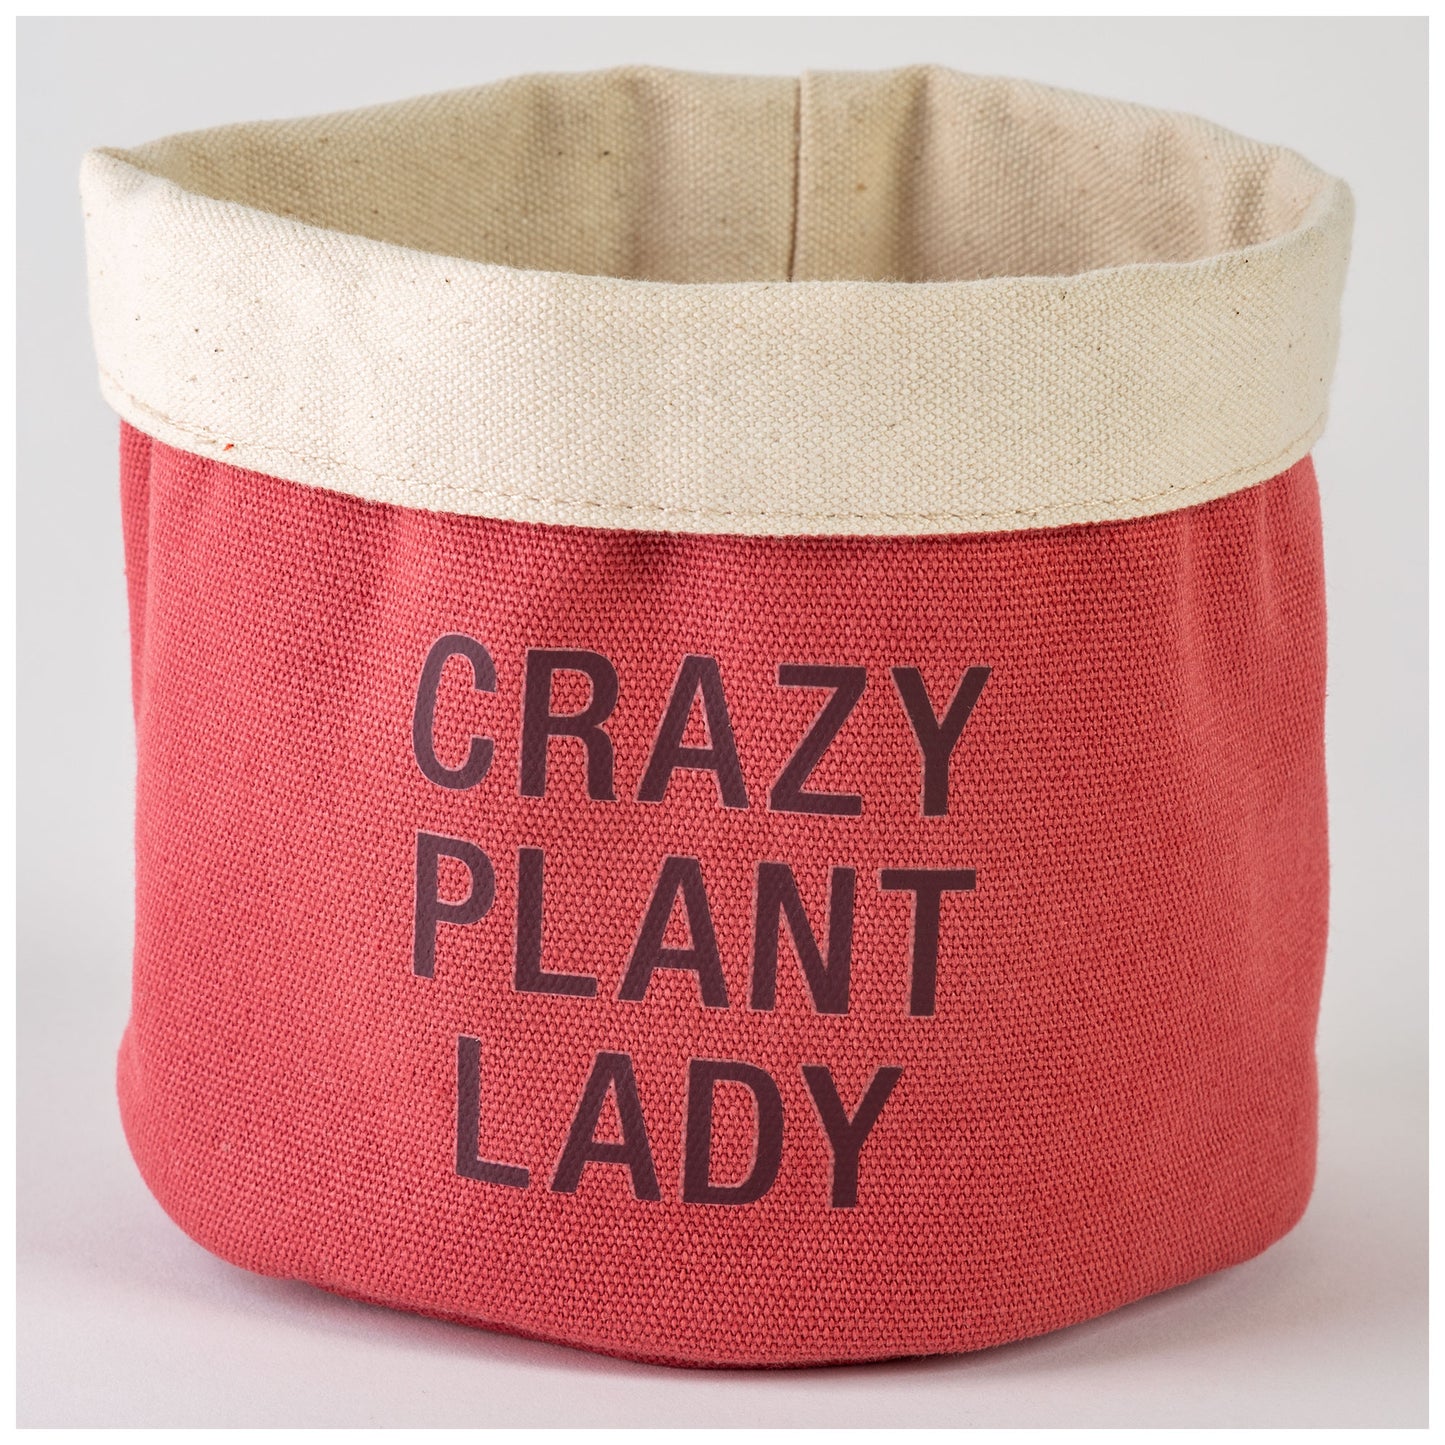 Crazy Plant Lady Indoor Planter Cover